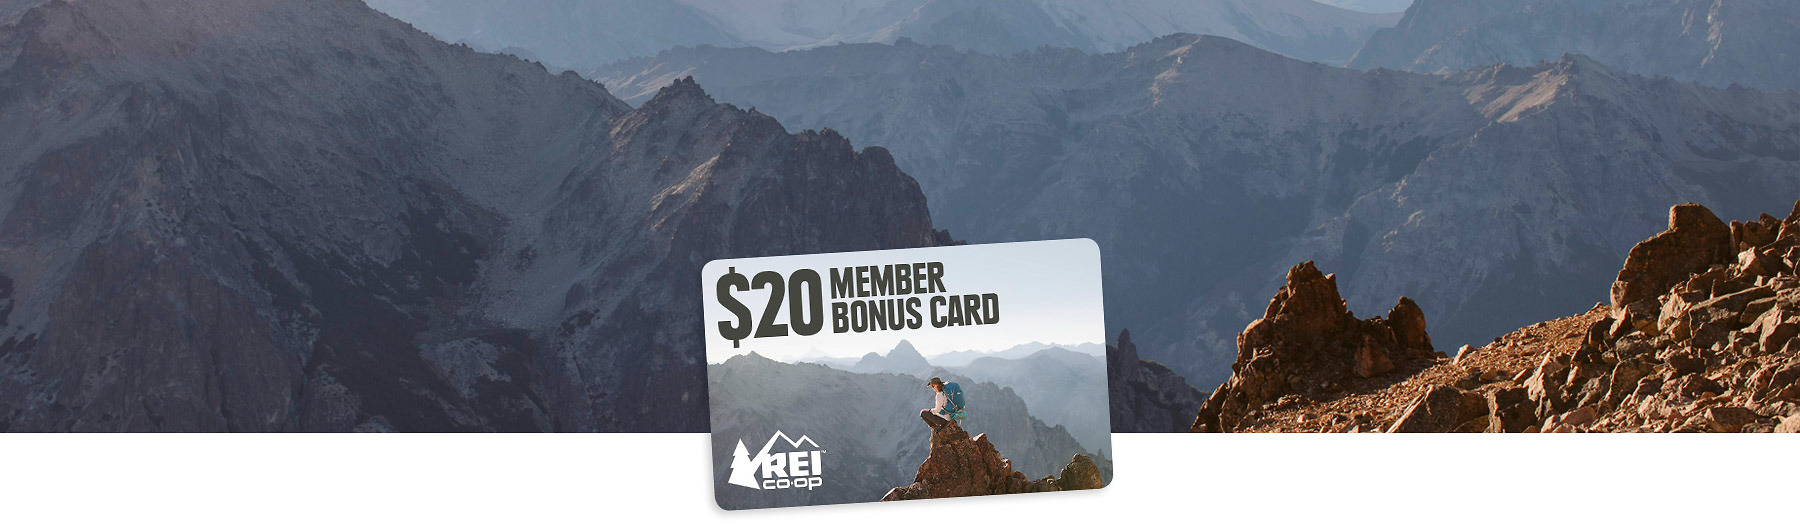 Members who spend $100 or more thru July 31 can earn a $20 bonus card